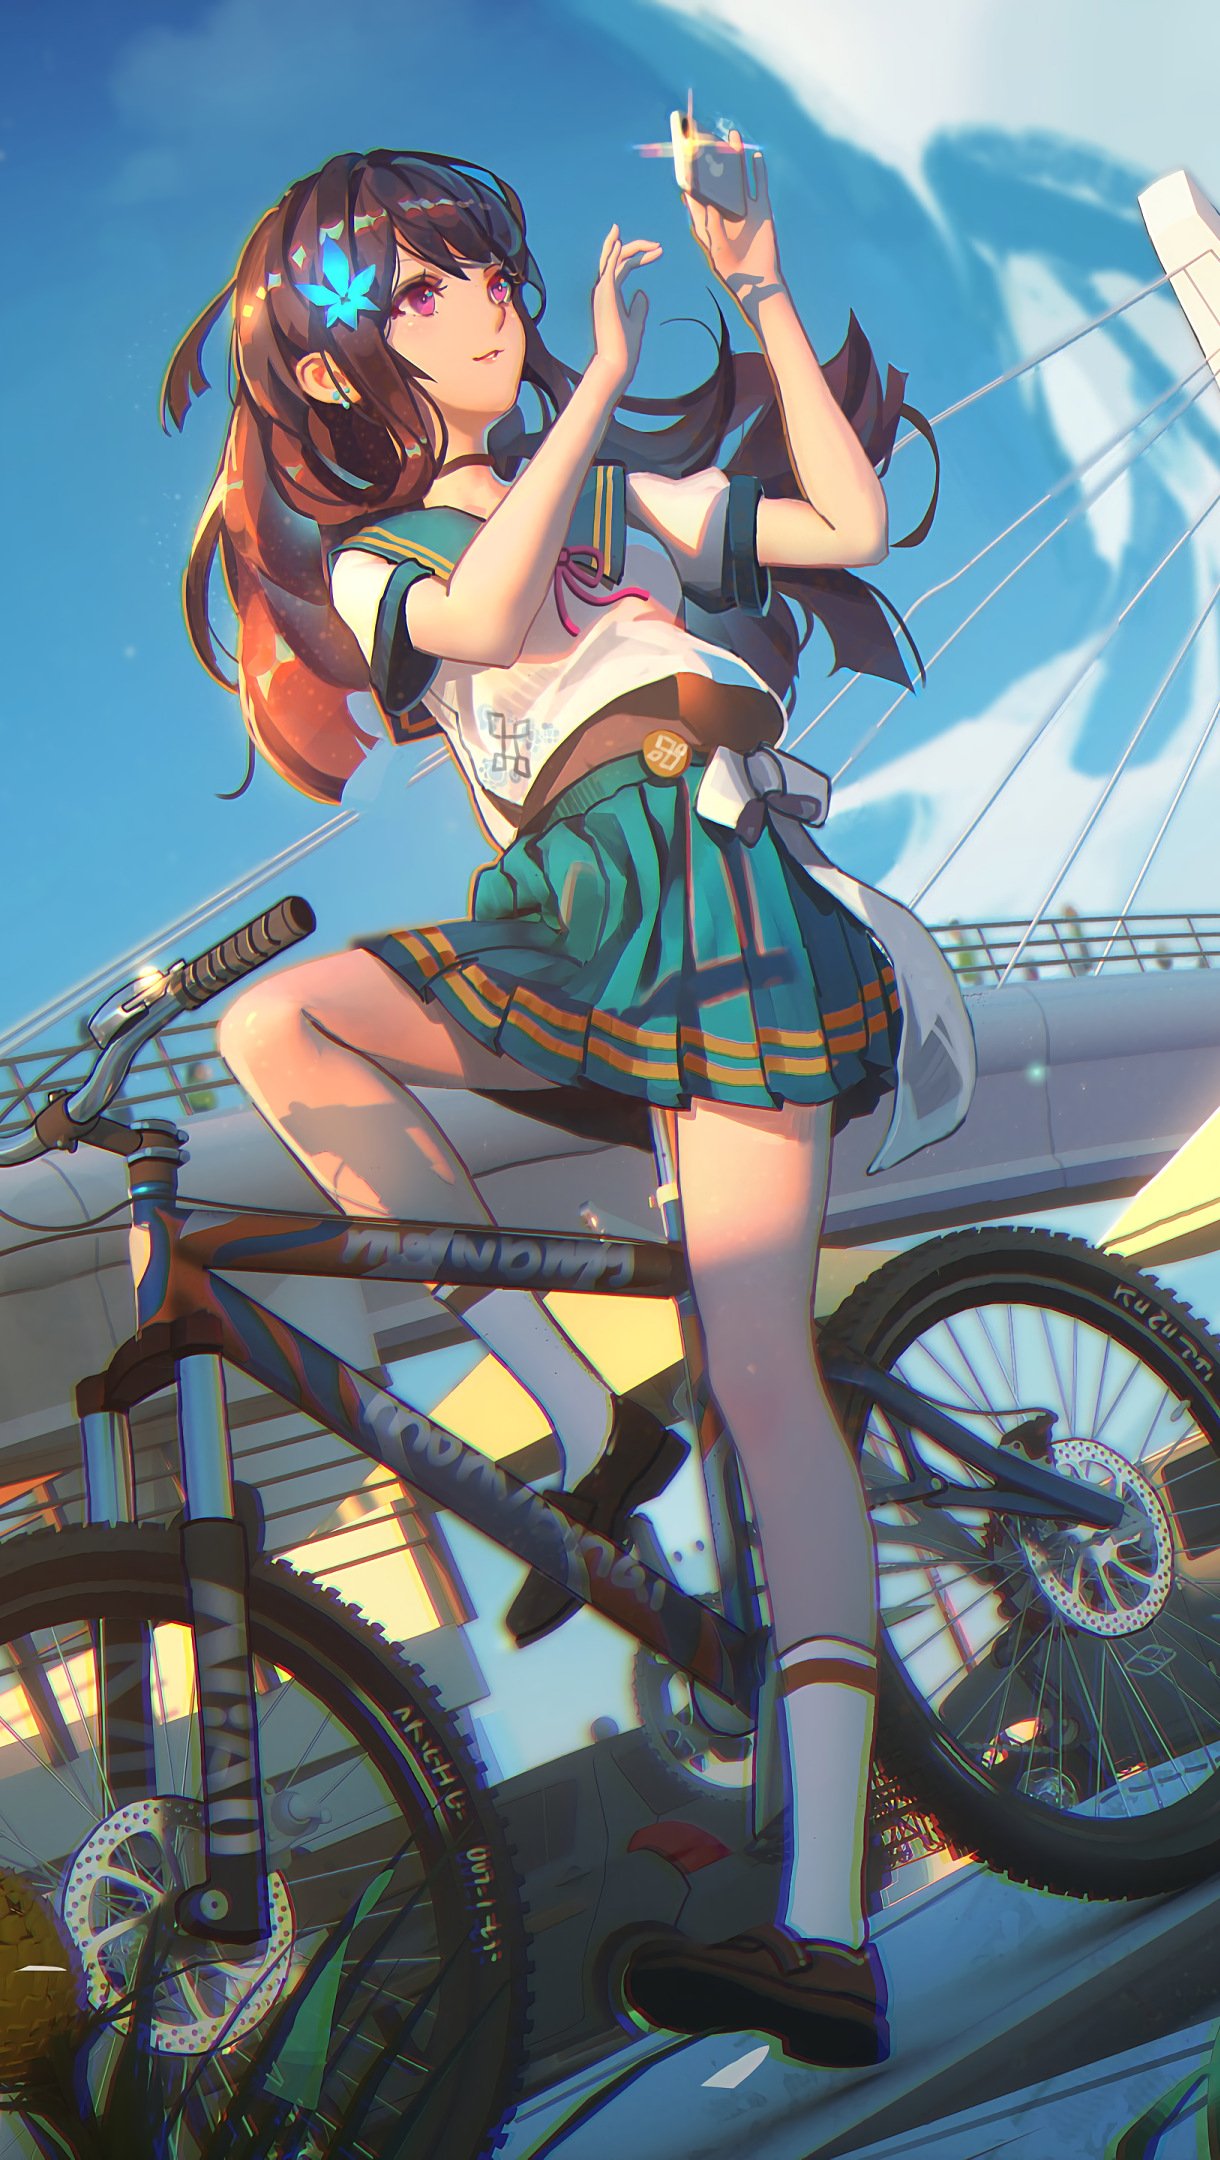 Anime student girl on a bicycle Wallpaper 4k Ultra HD ID:3722